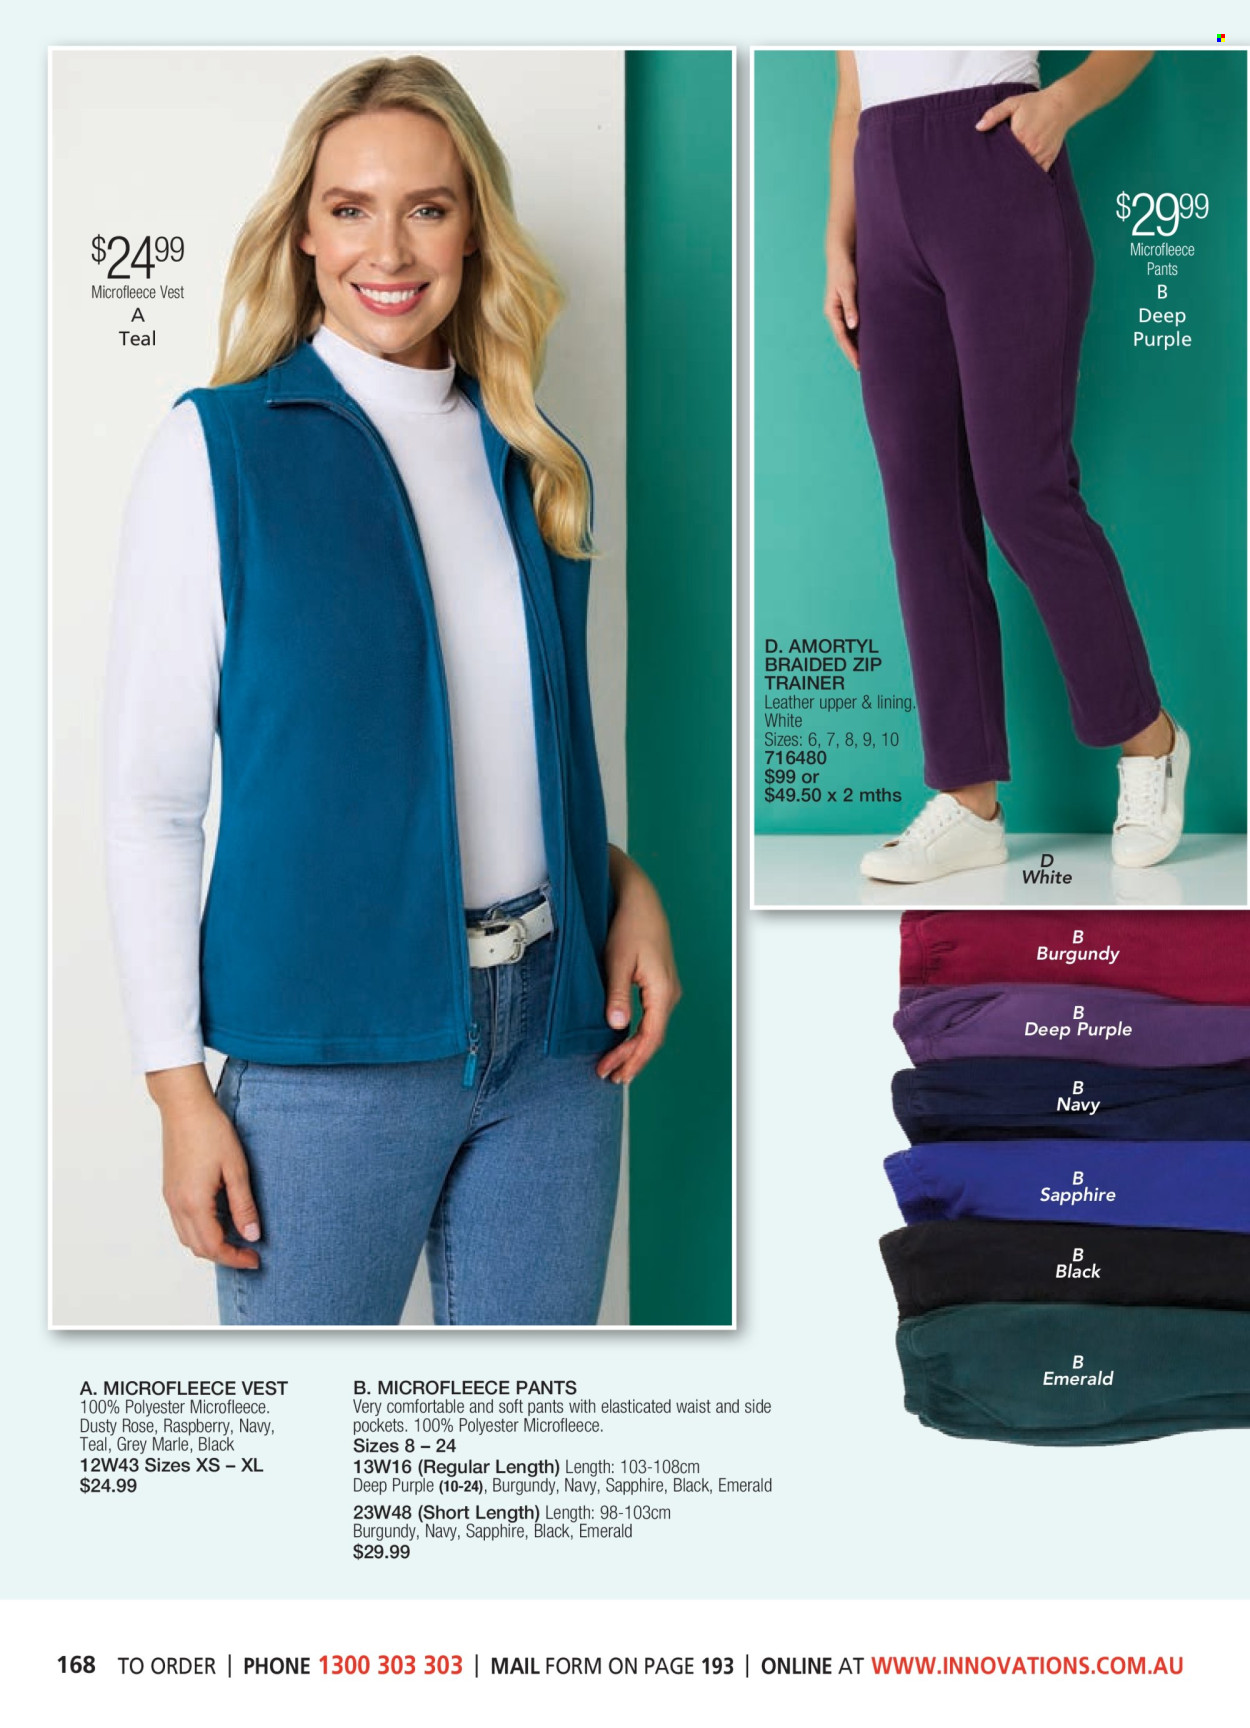 thumbnail - Innovations Catalogue - Sales products - pants, vest. Page 168.